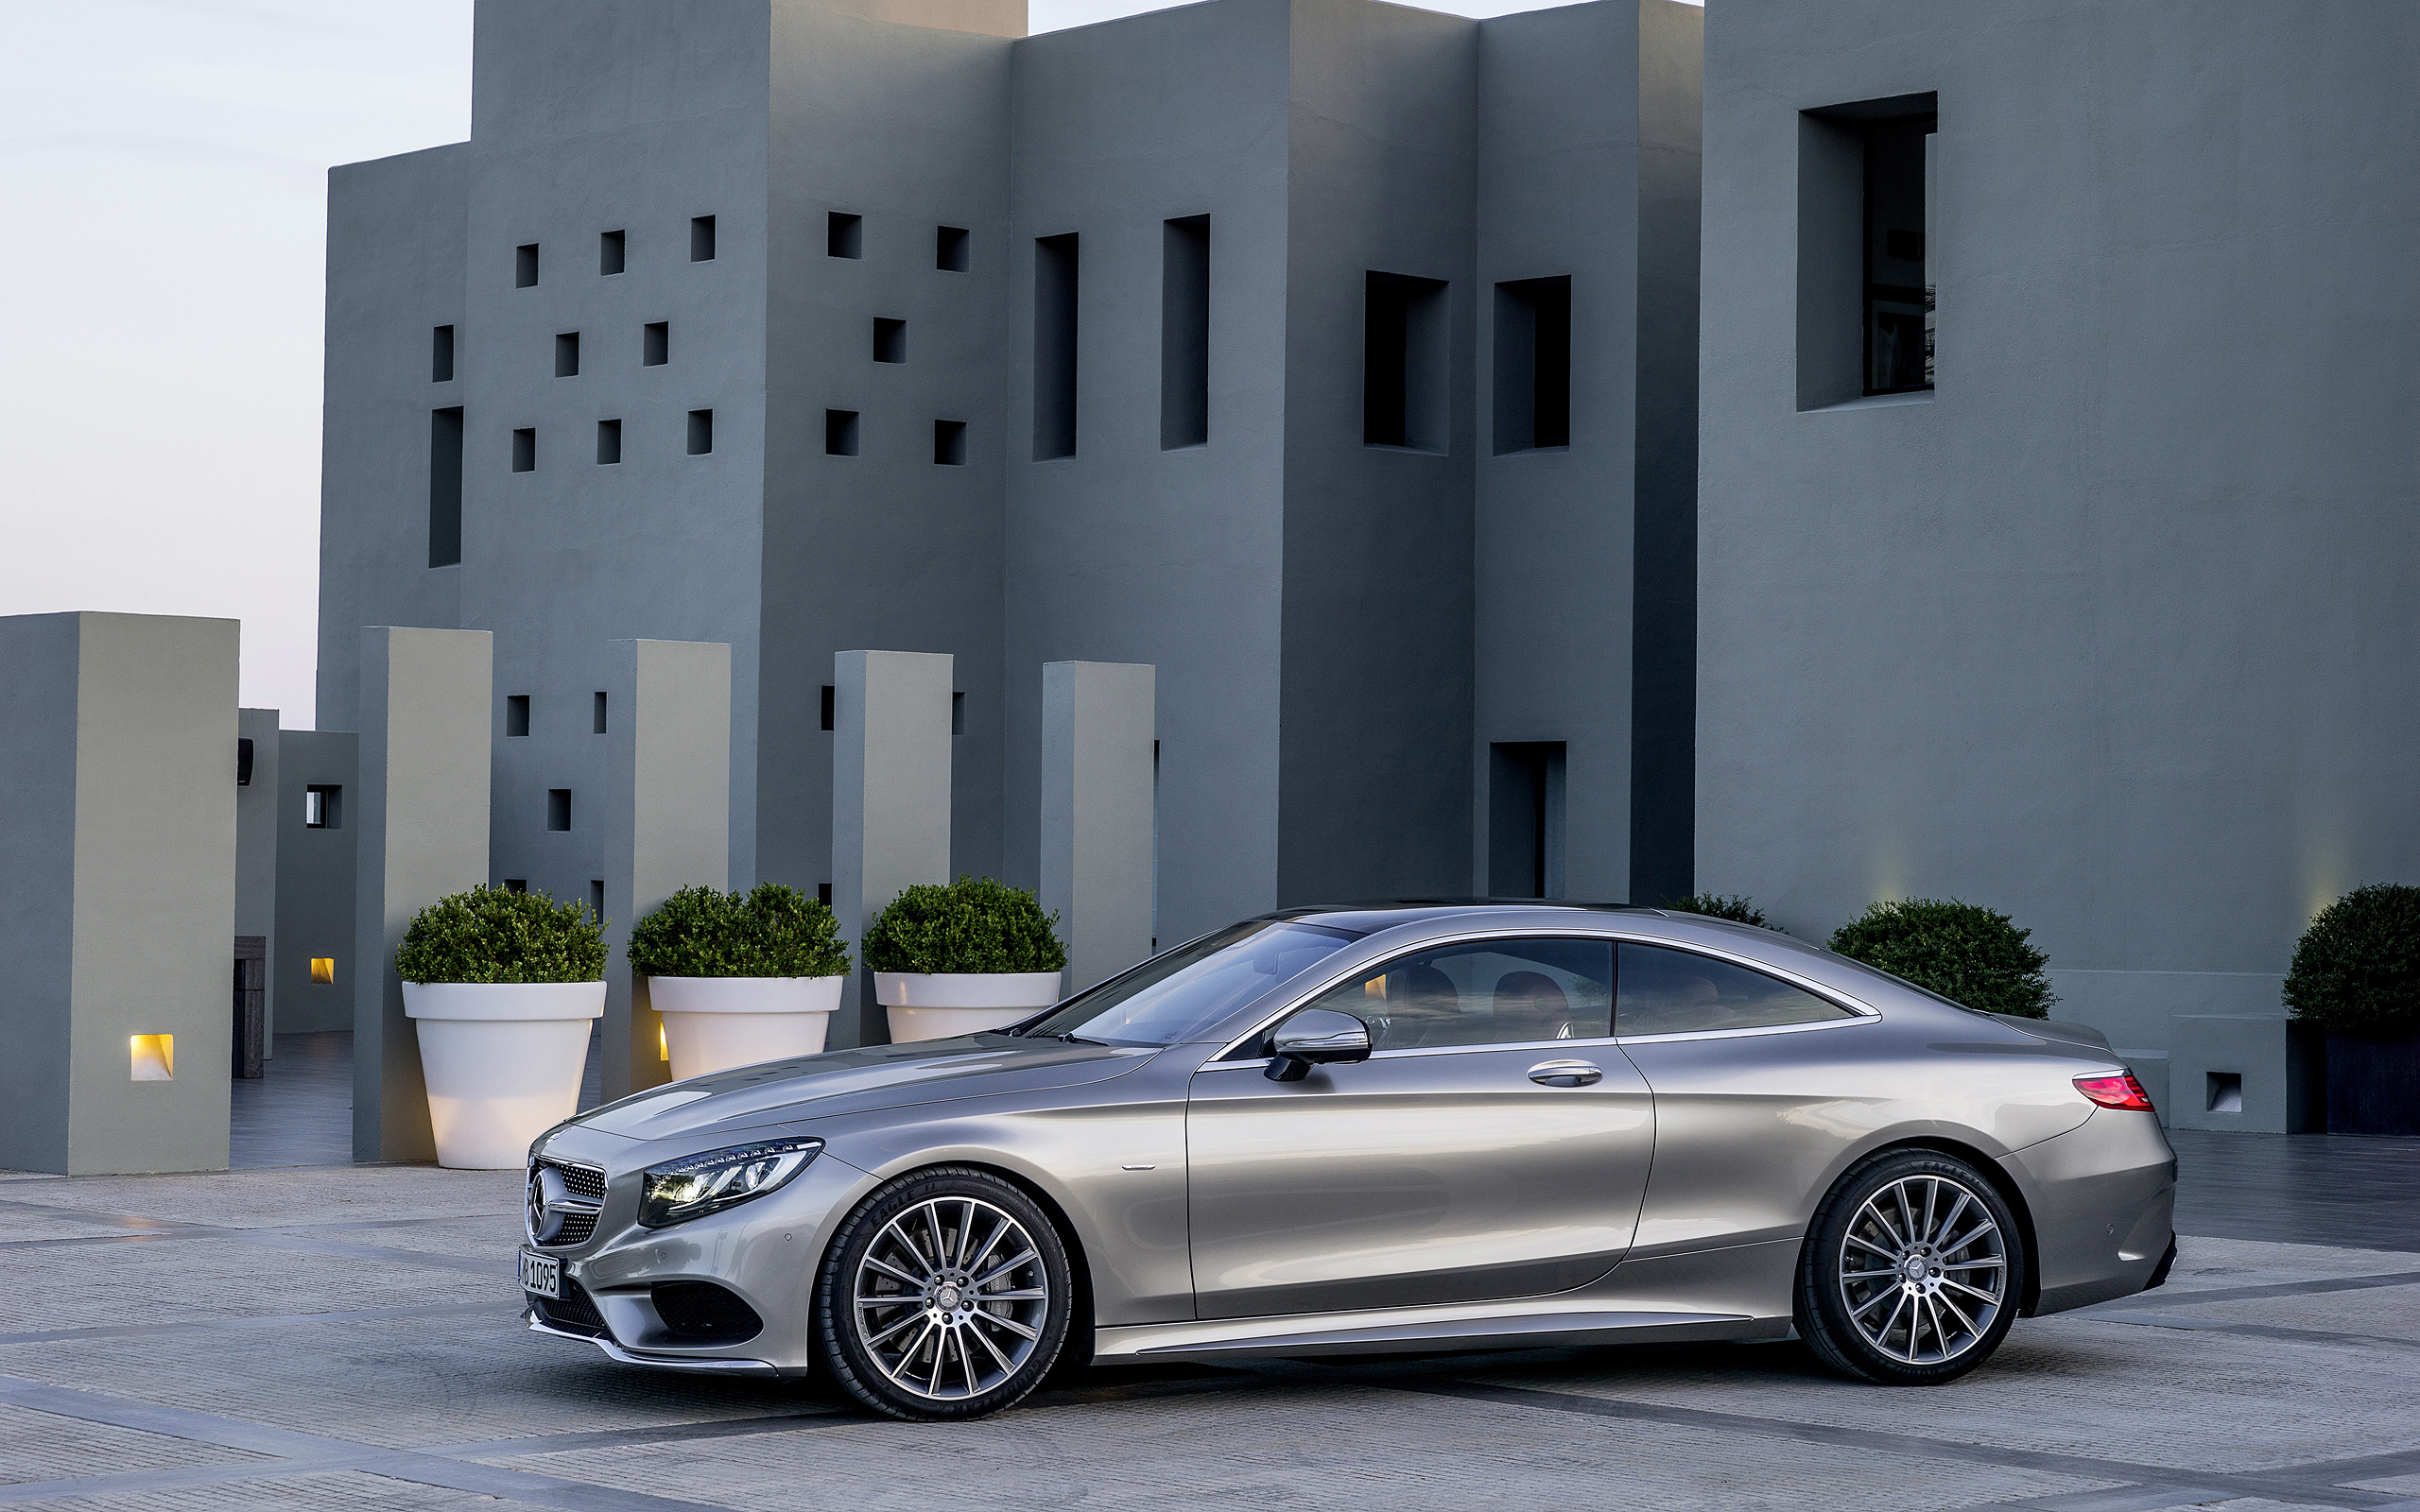 2015 Mercedes-Benz S-Class Coupe Wallpapers | SuperCars.net